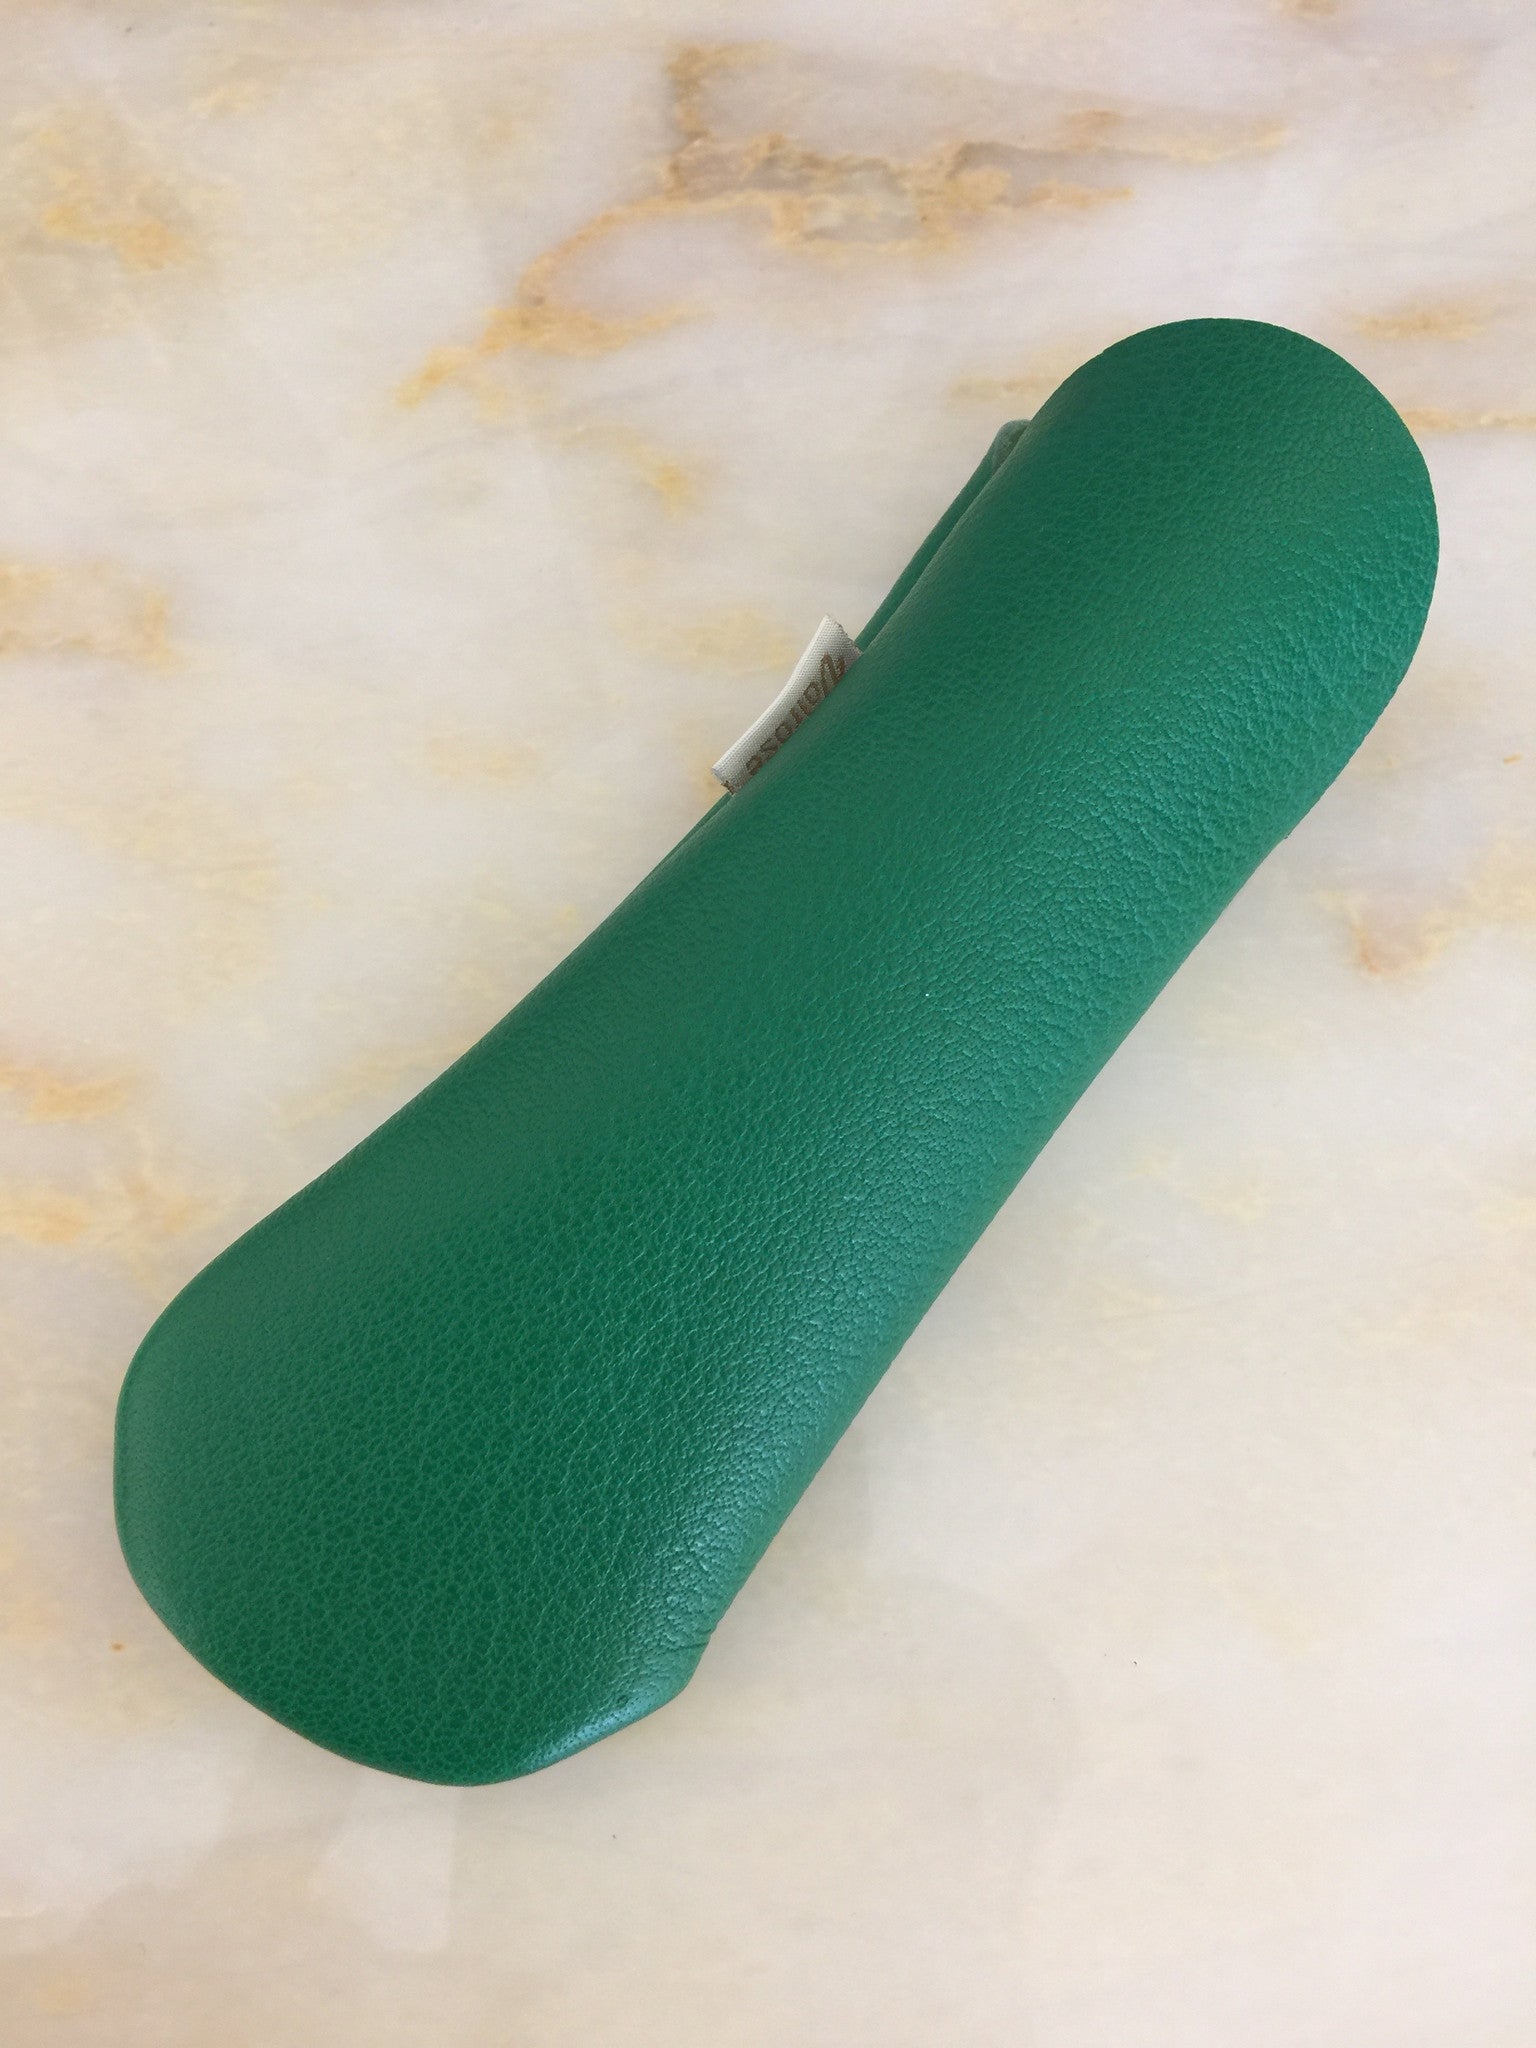 Hand-made French leather eyeglass case